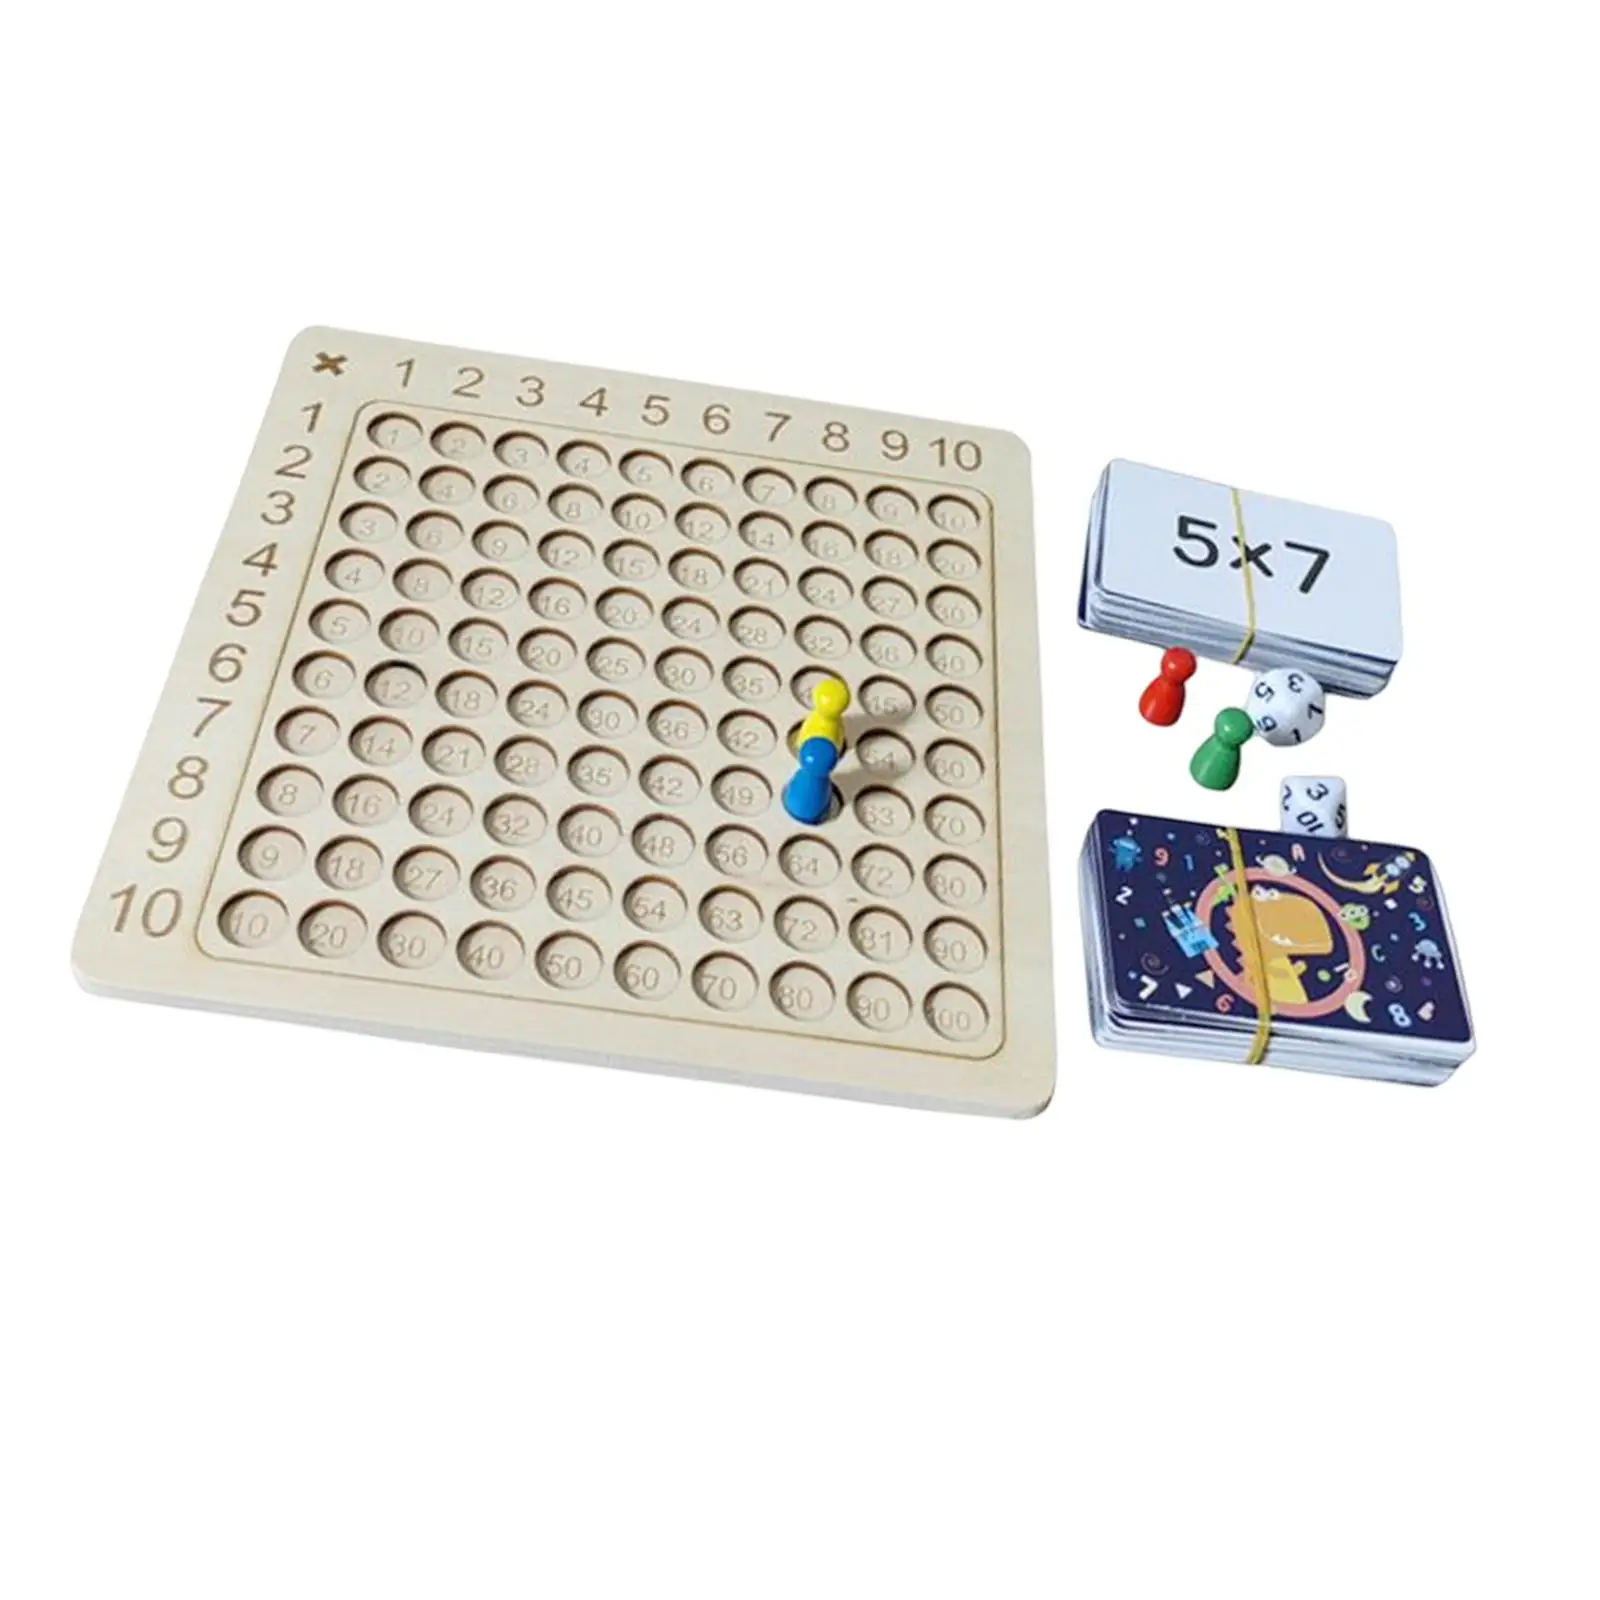 10x10 Multiplication Board Parent Child Interaction Montessori Math Educational with Numbers Number Games for Home Children